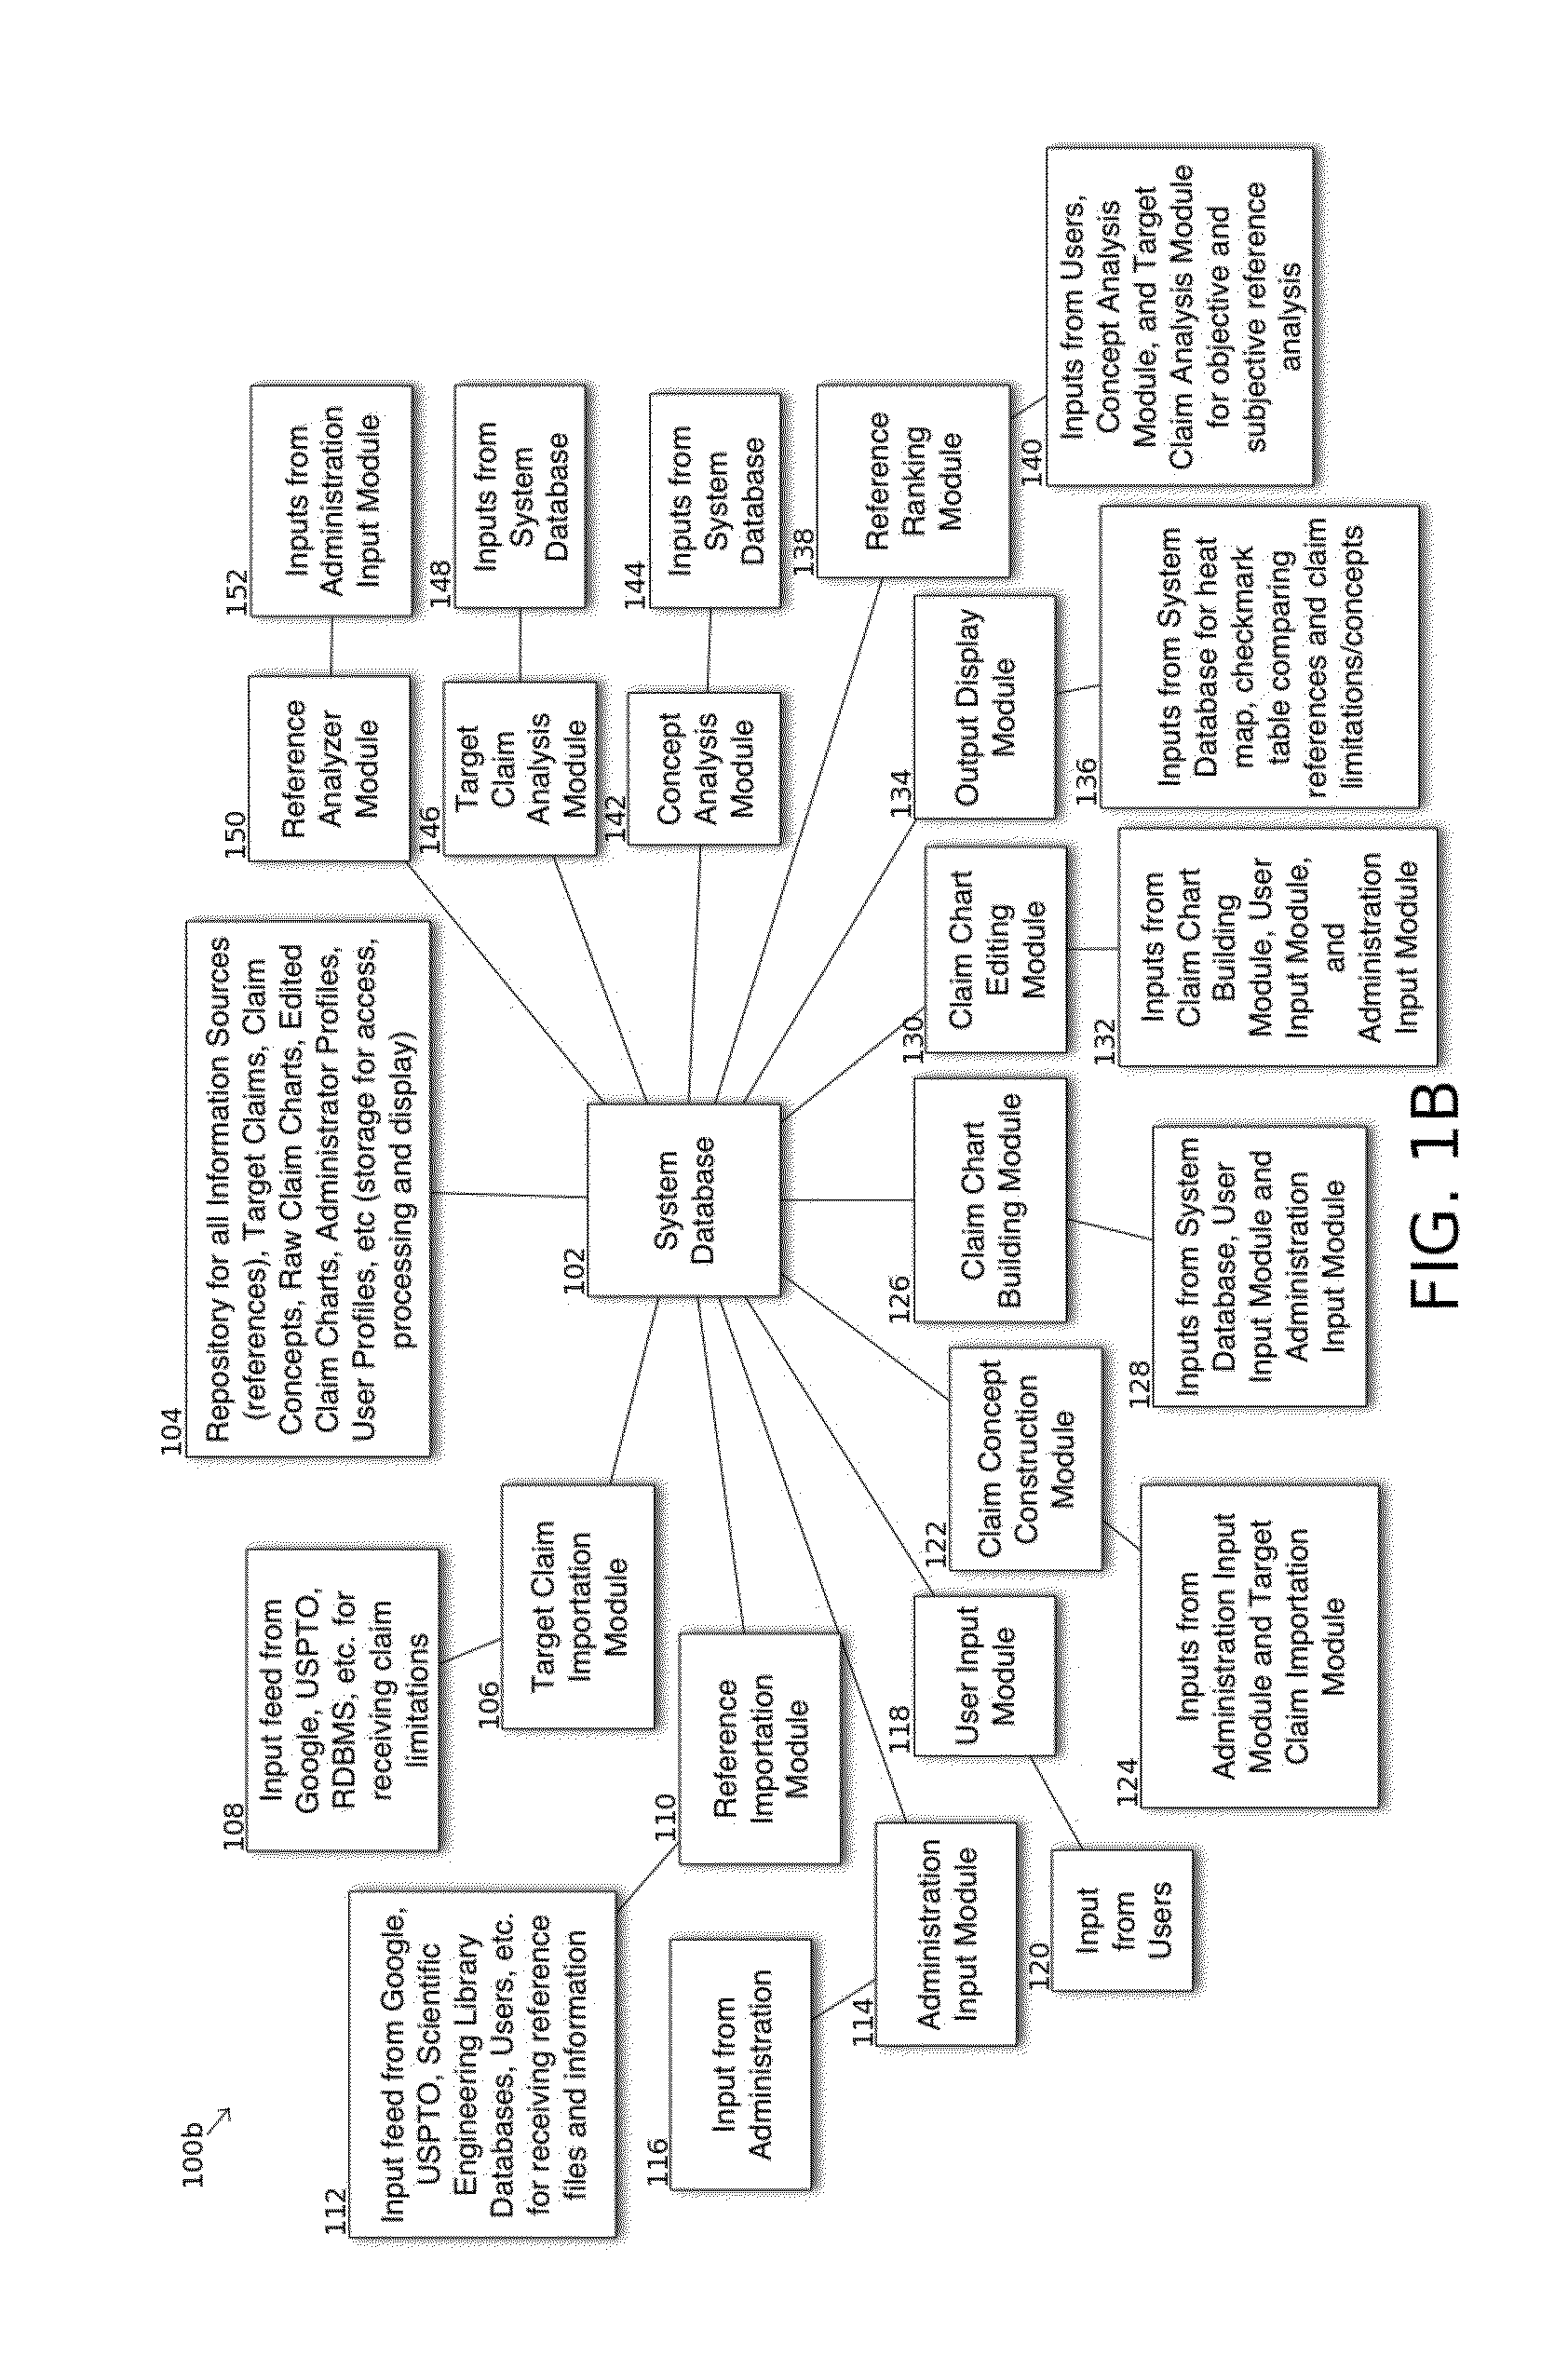 Collaboration and Analysis System for Disparate Information Sources